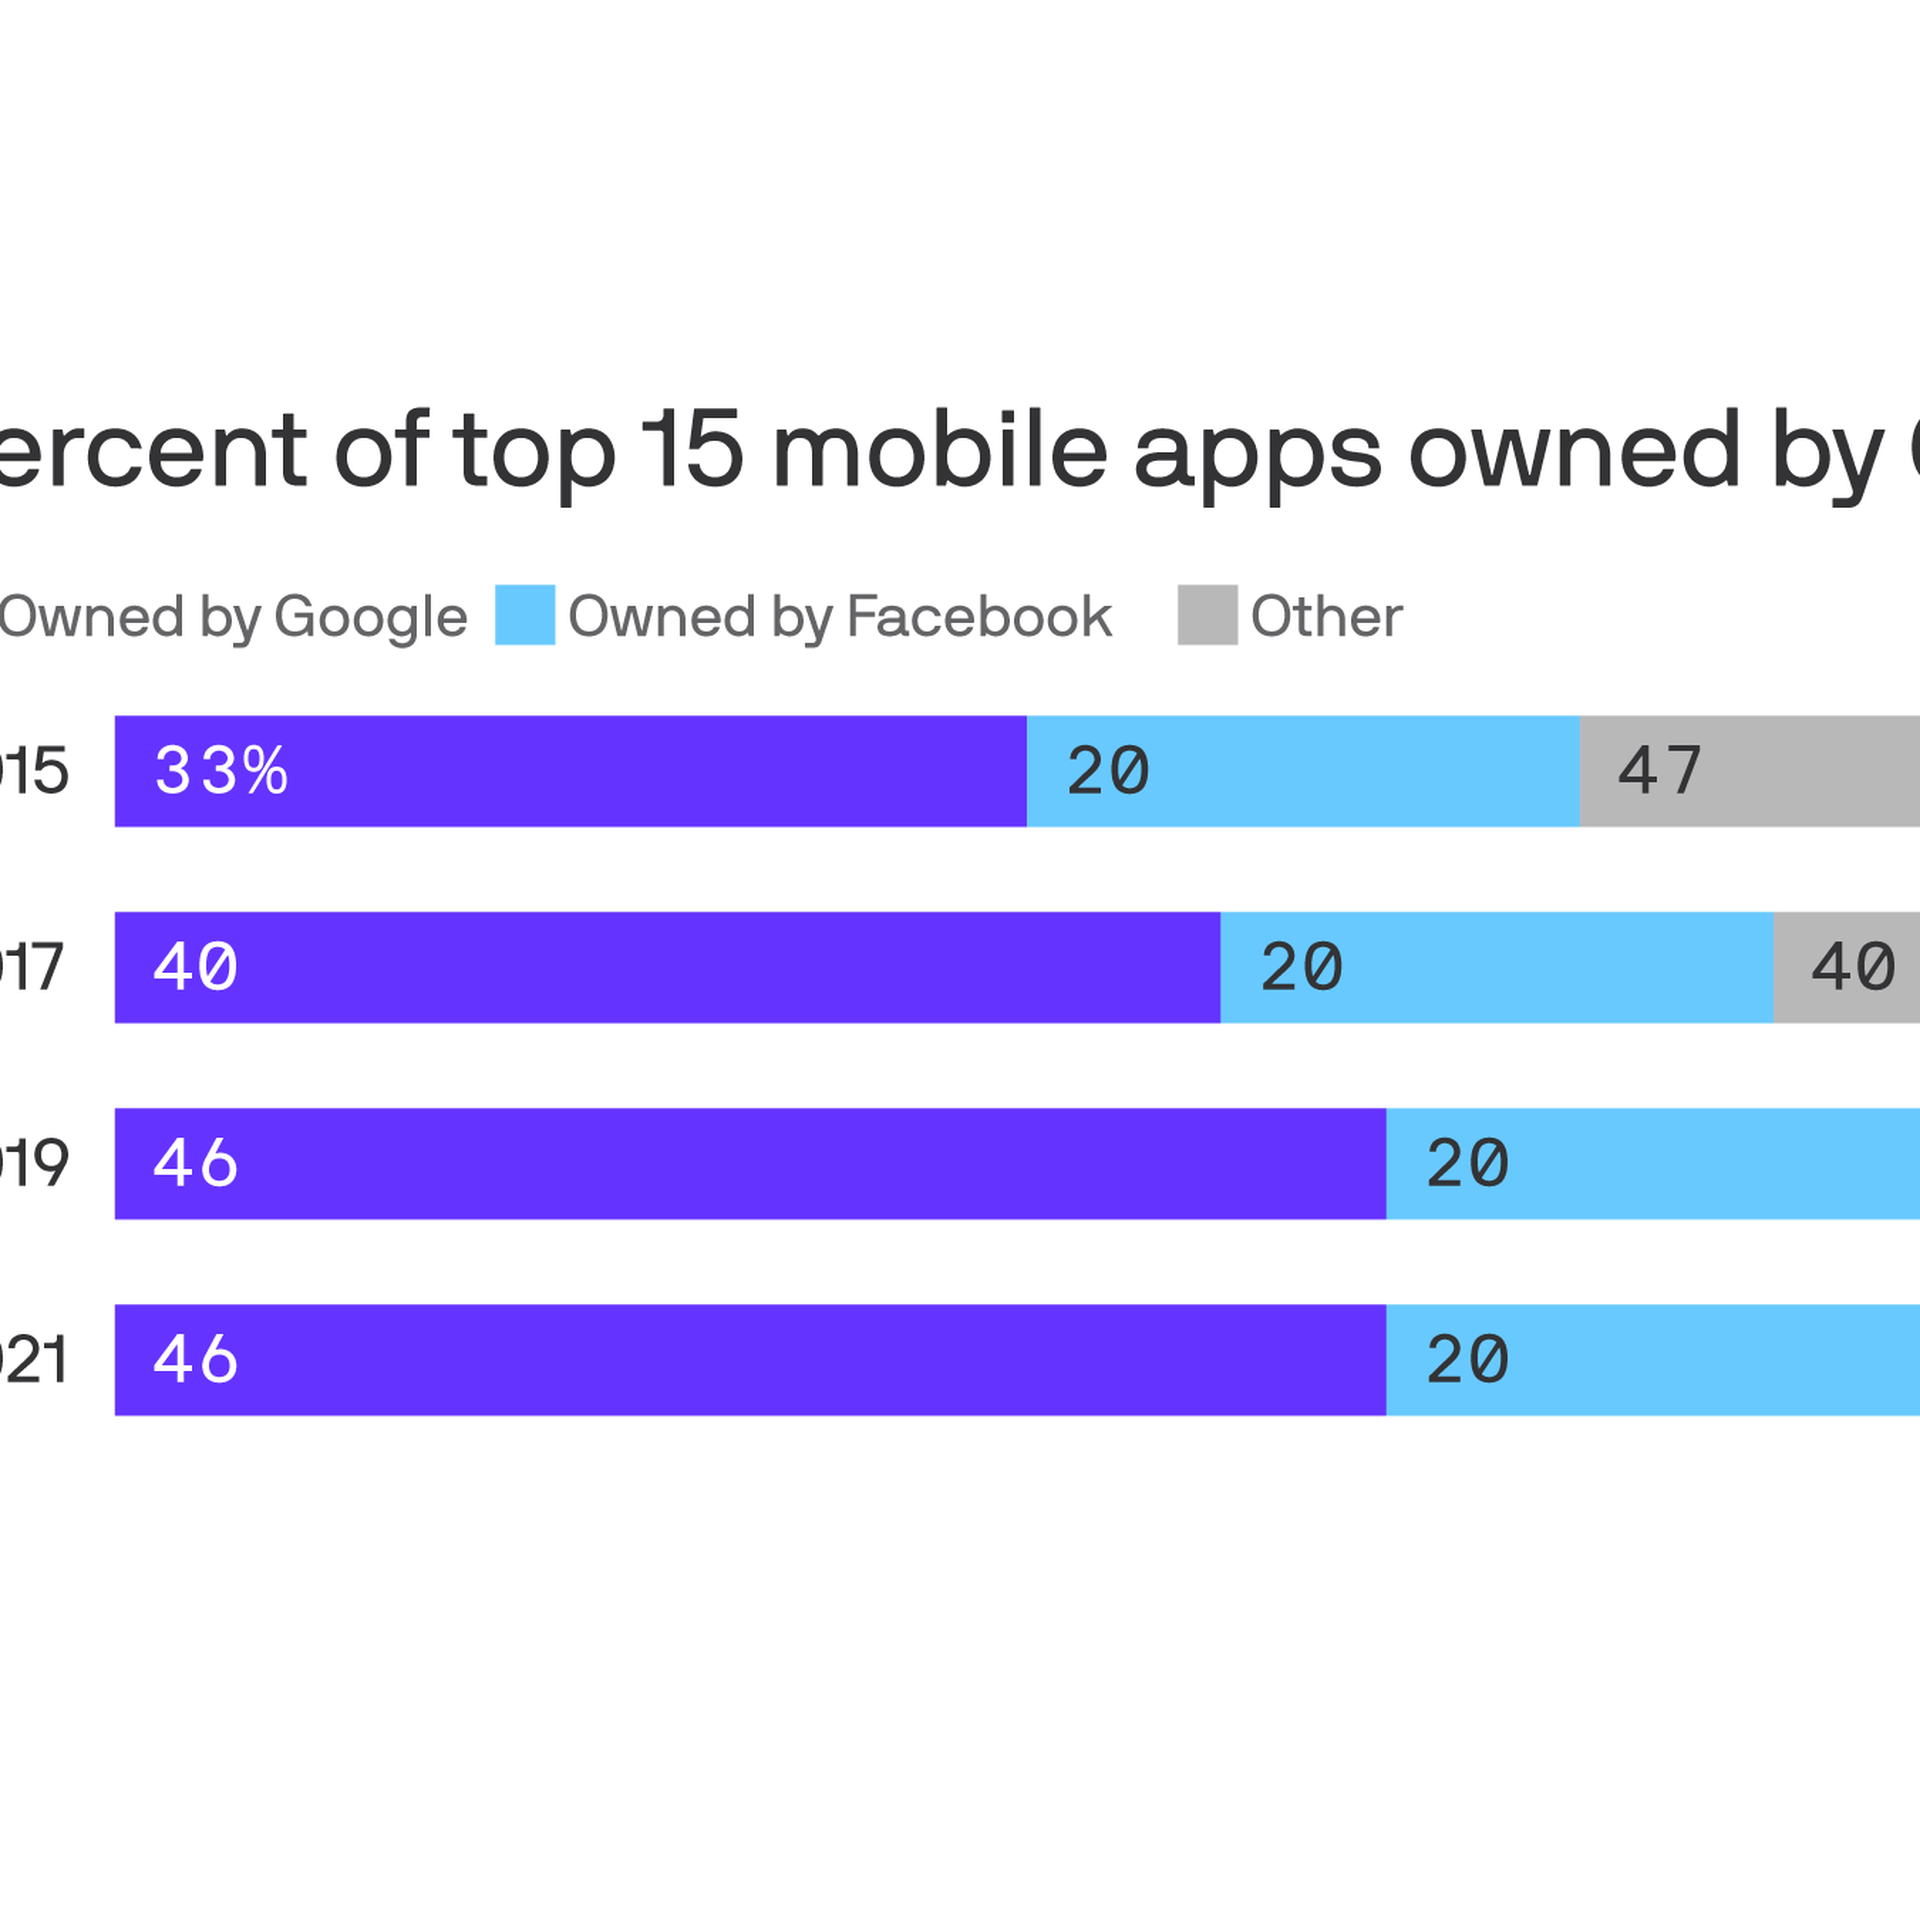 Meta dominates the top 10 mobile apps worldwide - Insider